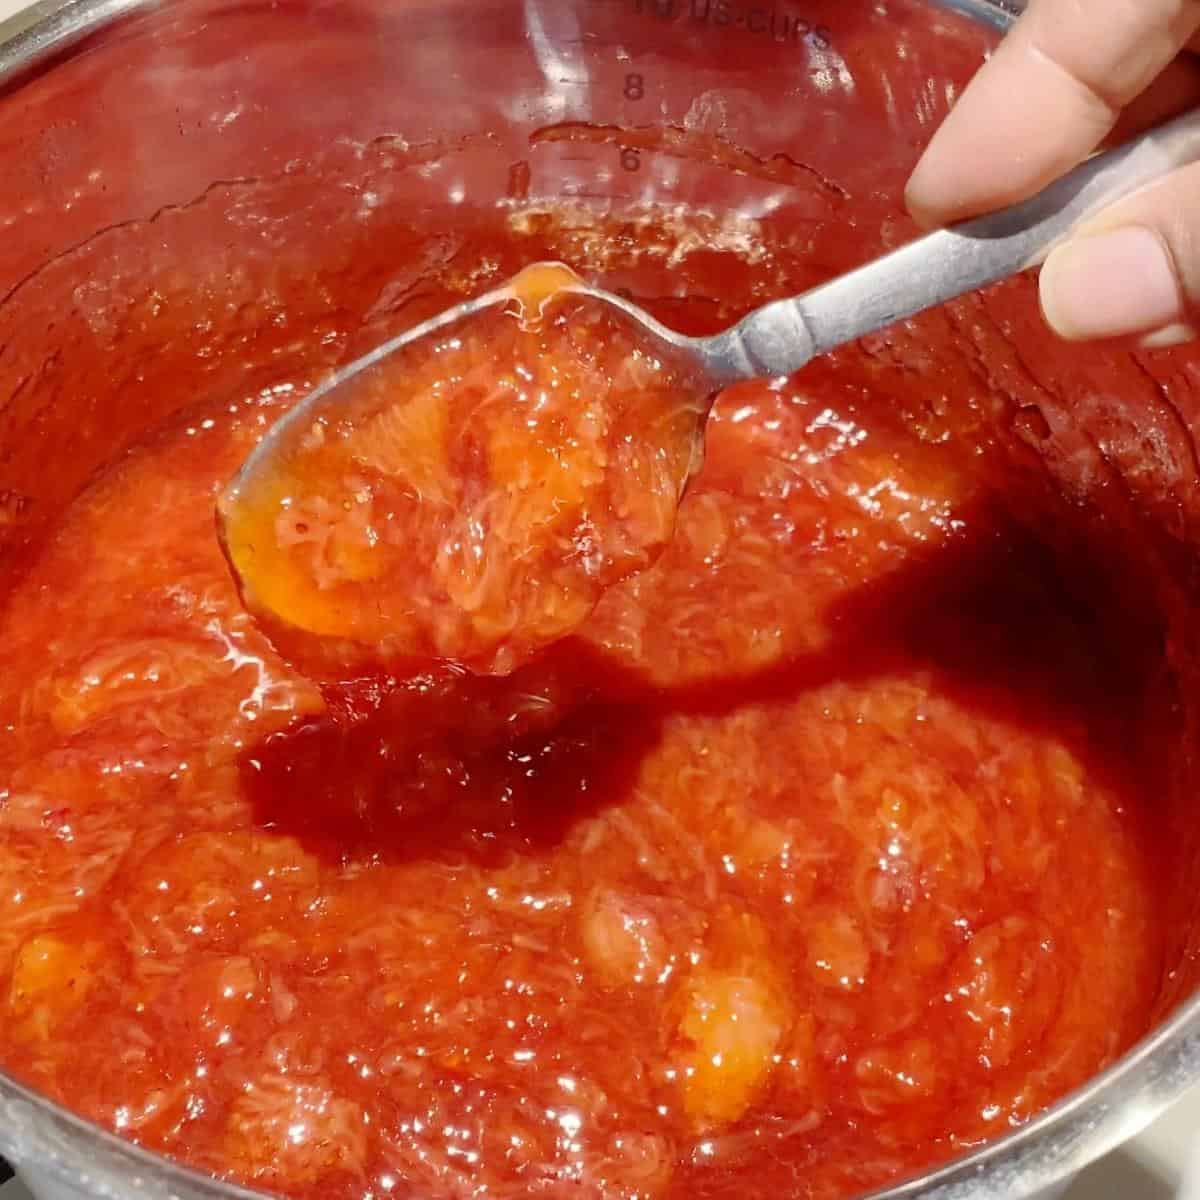 Strawberry filling for cakes cooking in a pot.